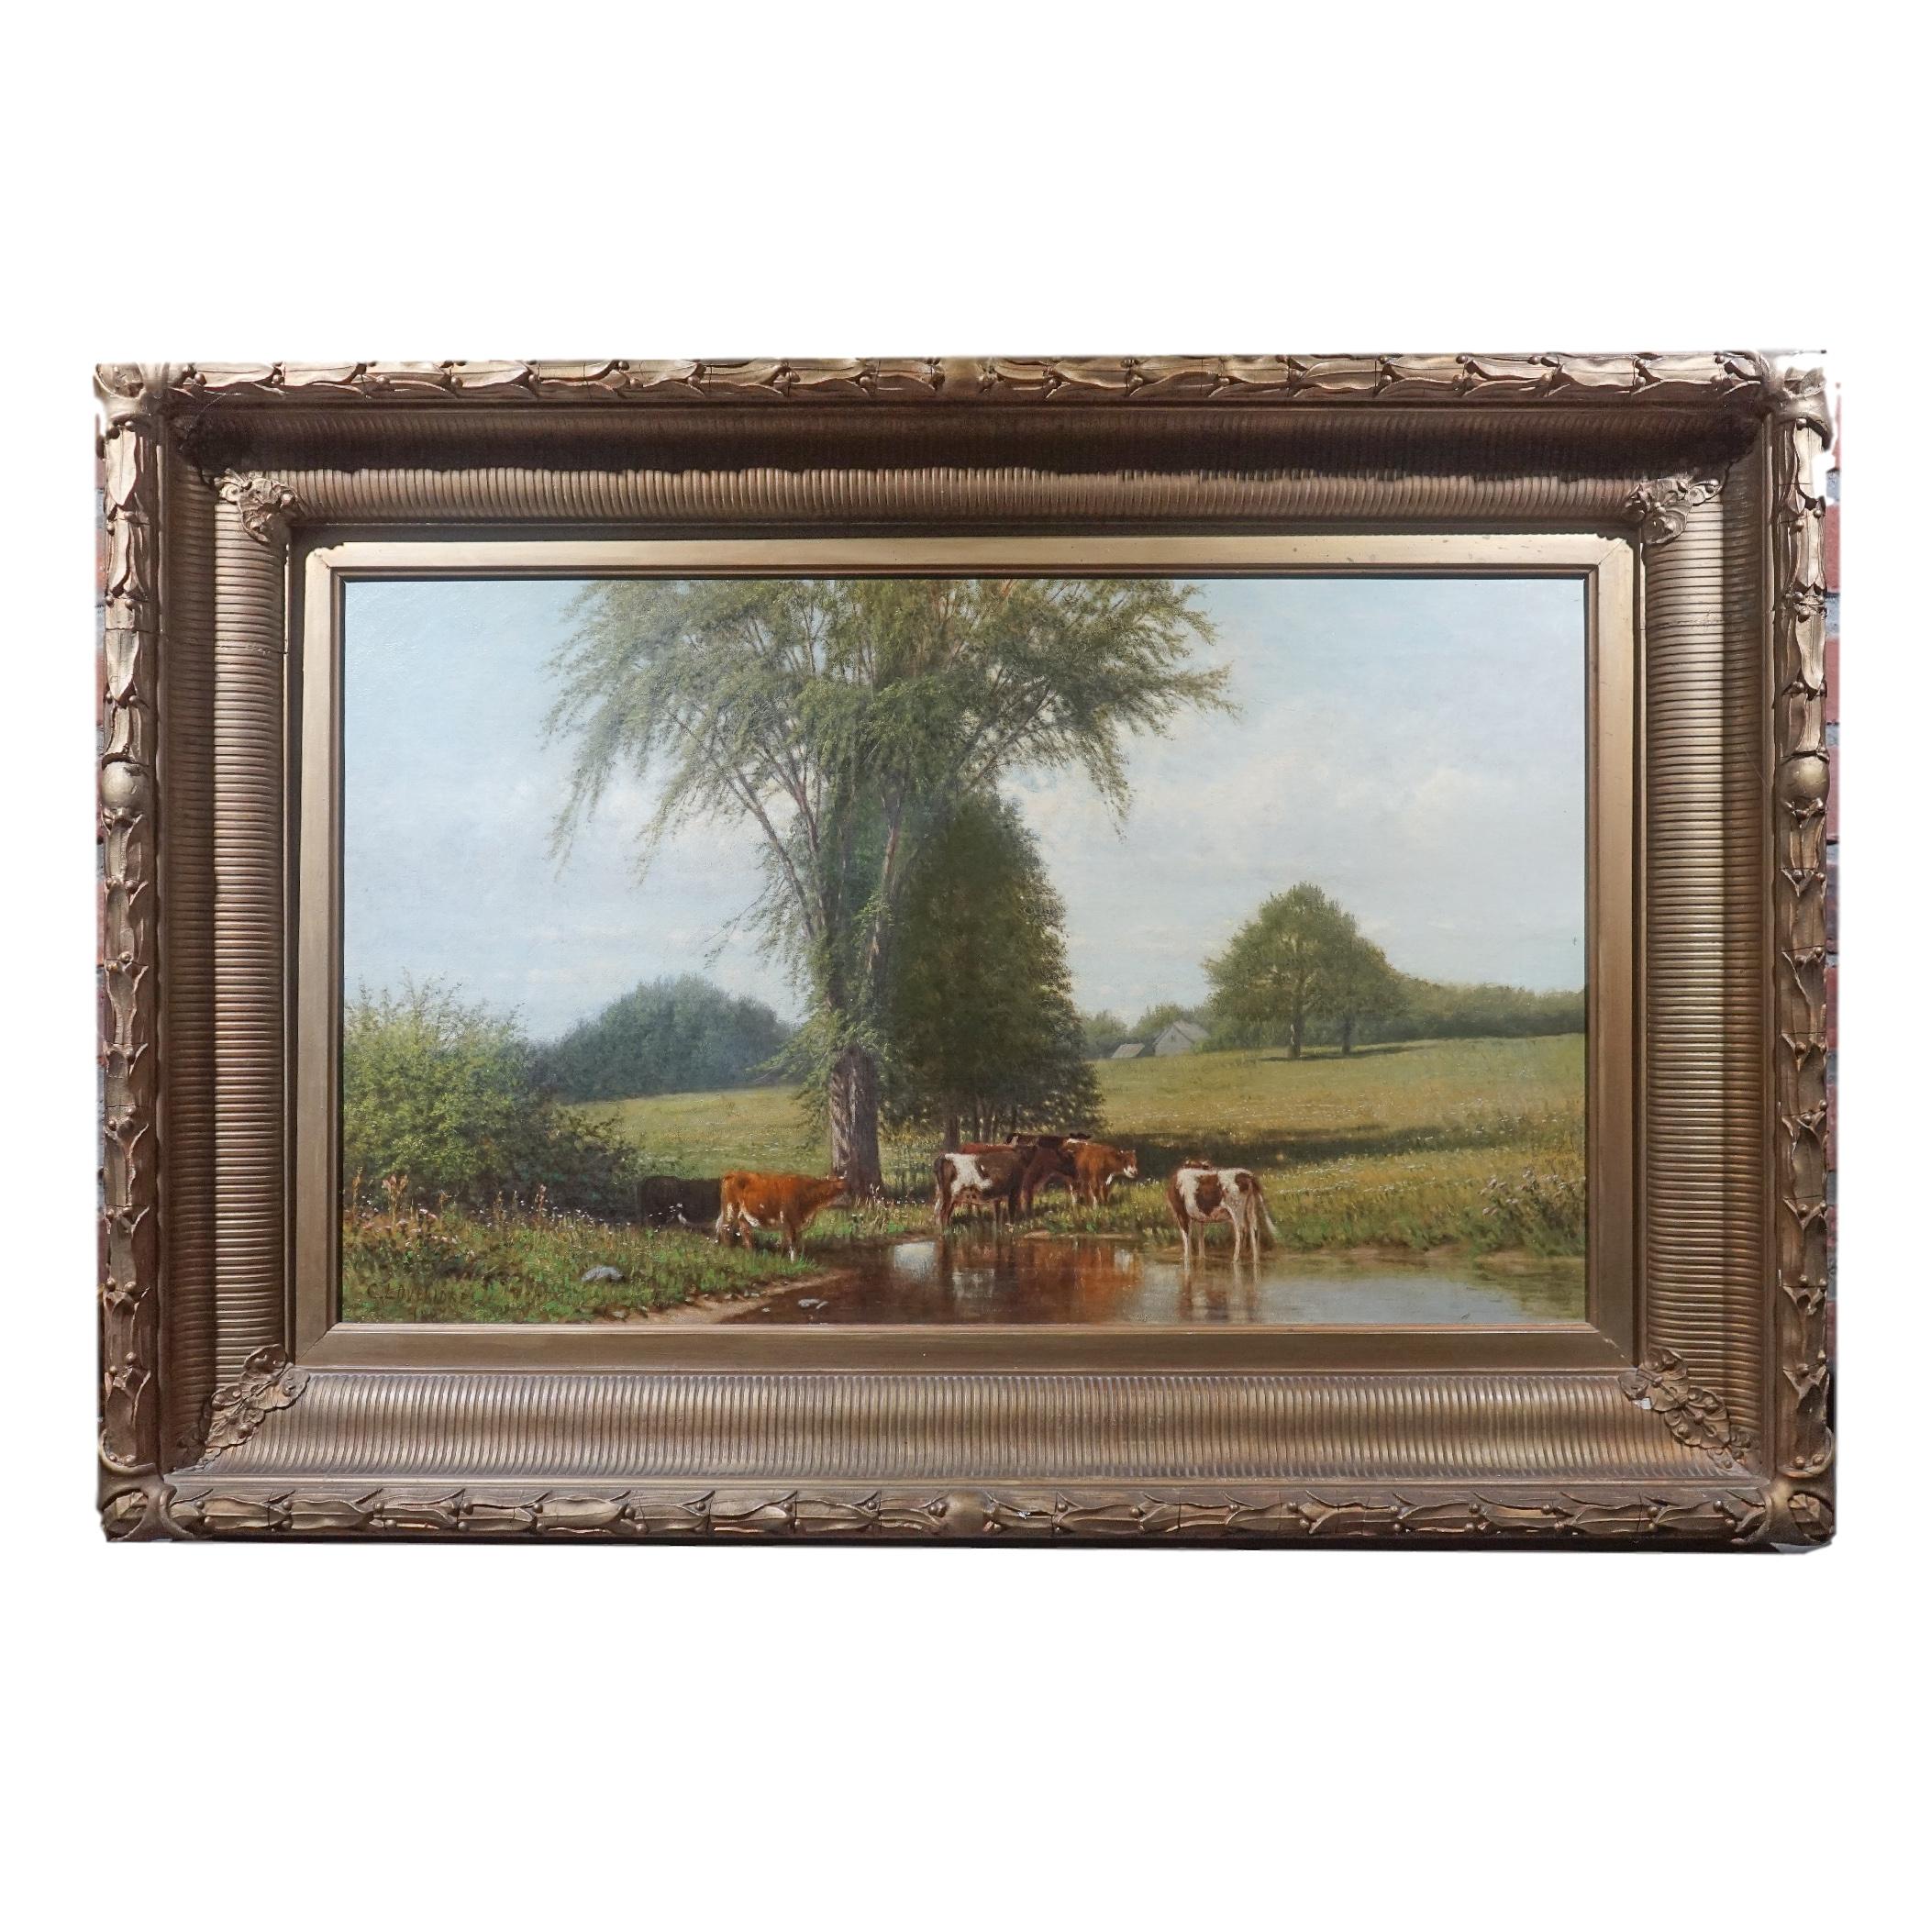 Clinton Loveridge Animal Painting - Hudson River school Bucolic Pastoral Cows in a farm w/ Trout Stream Painting